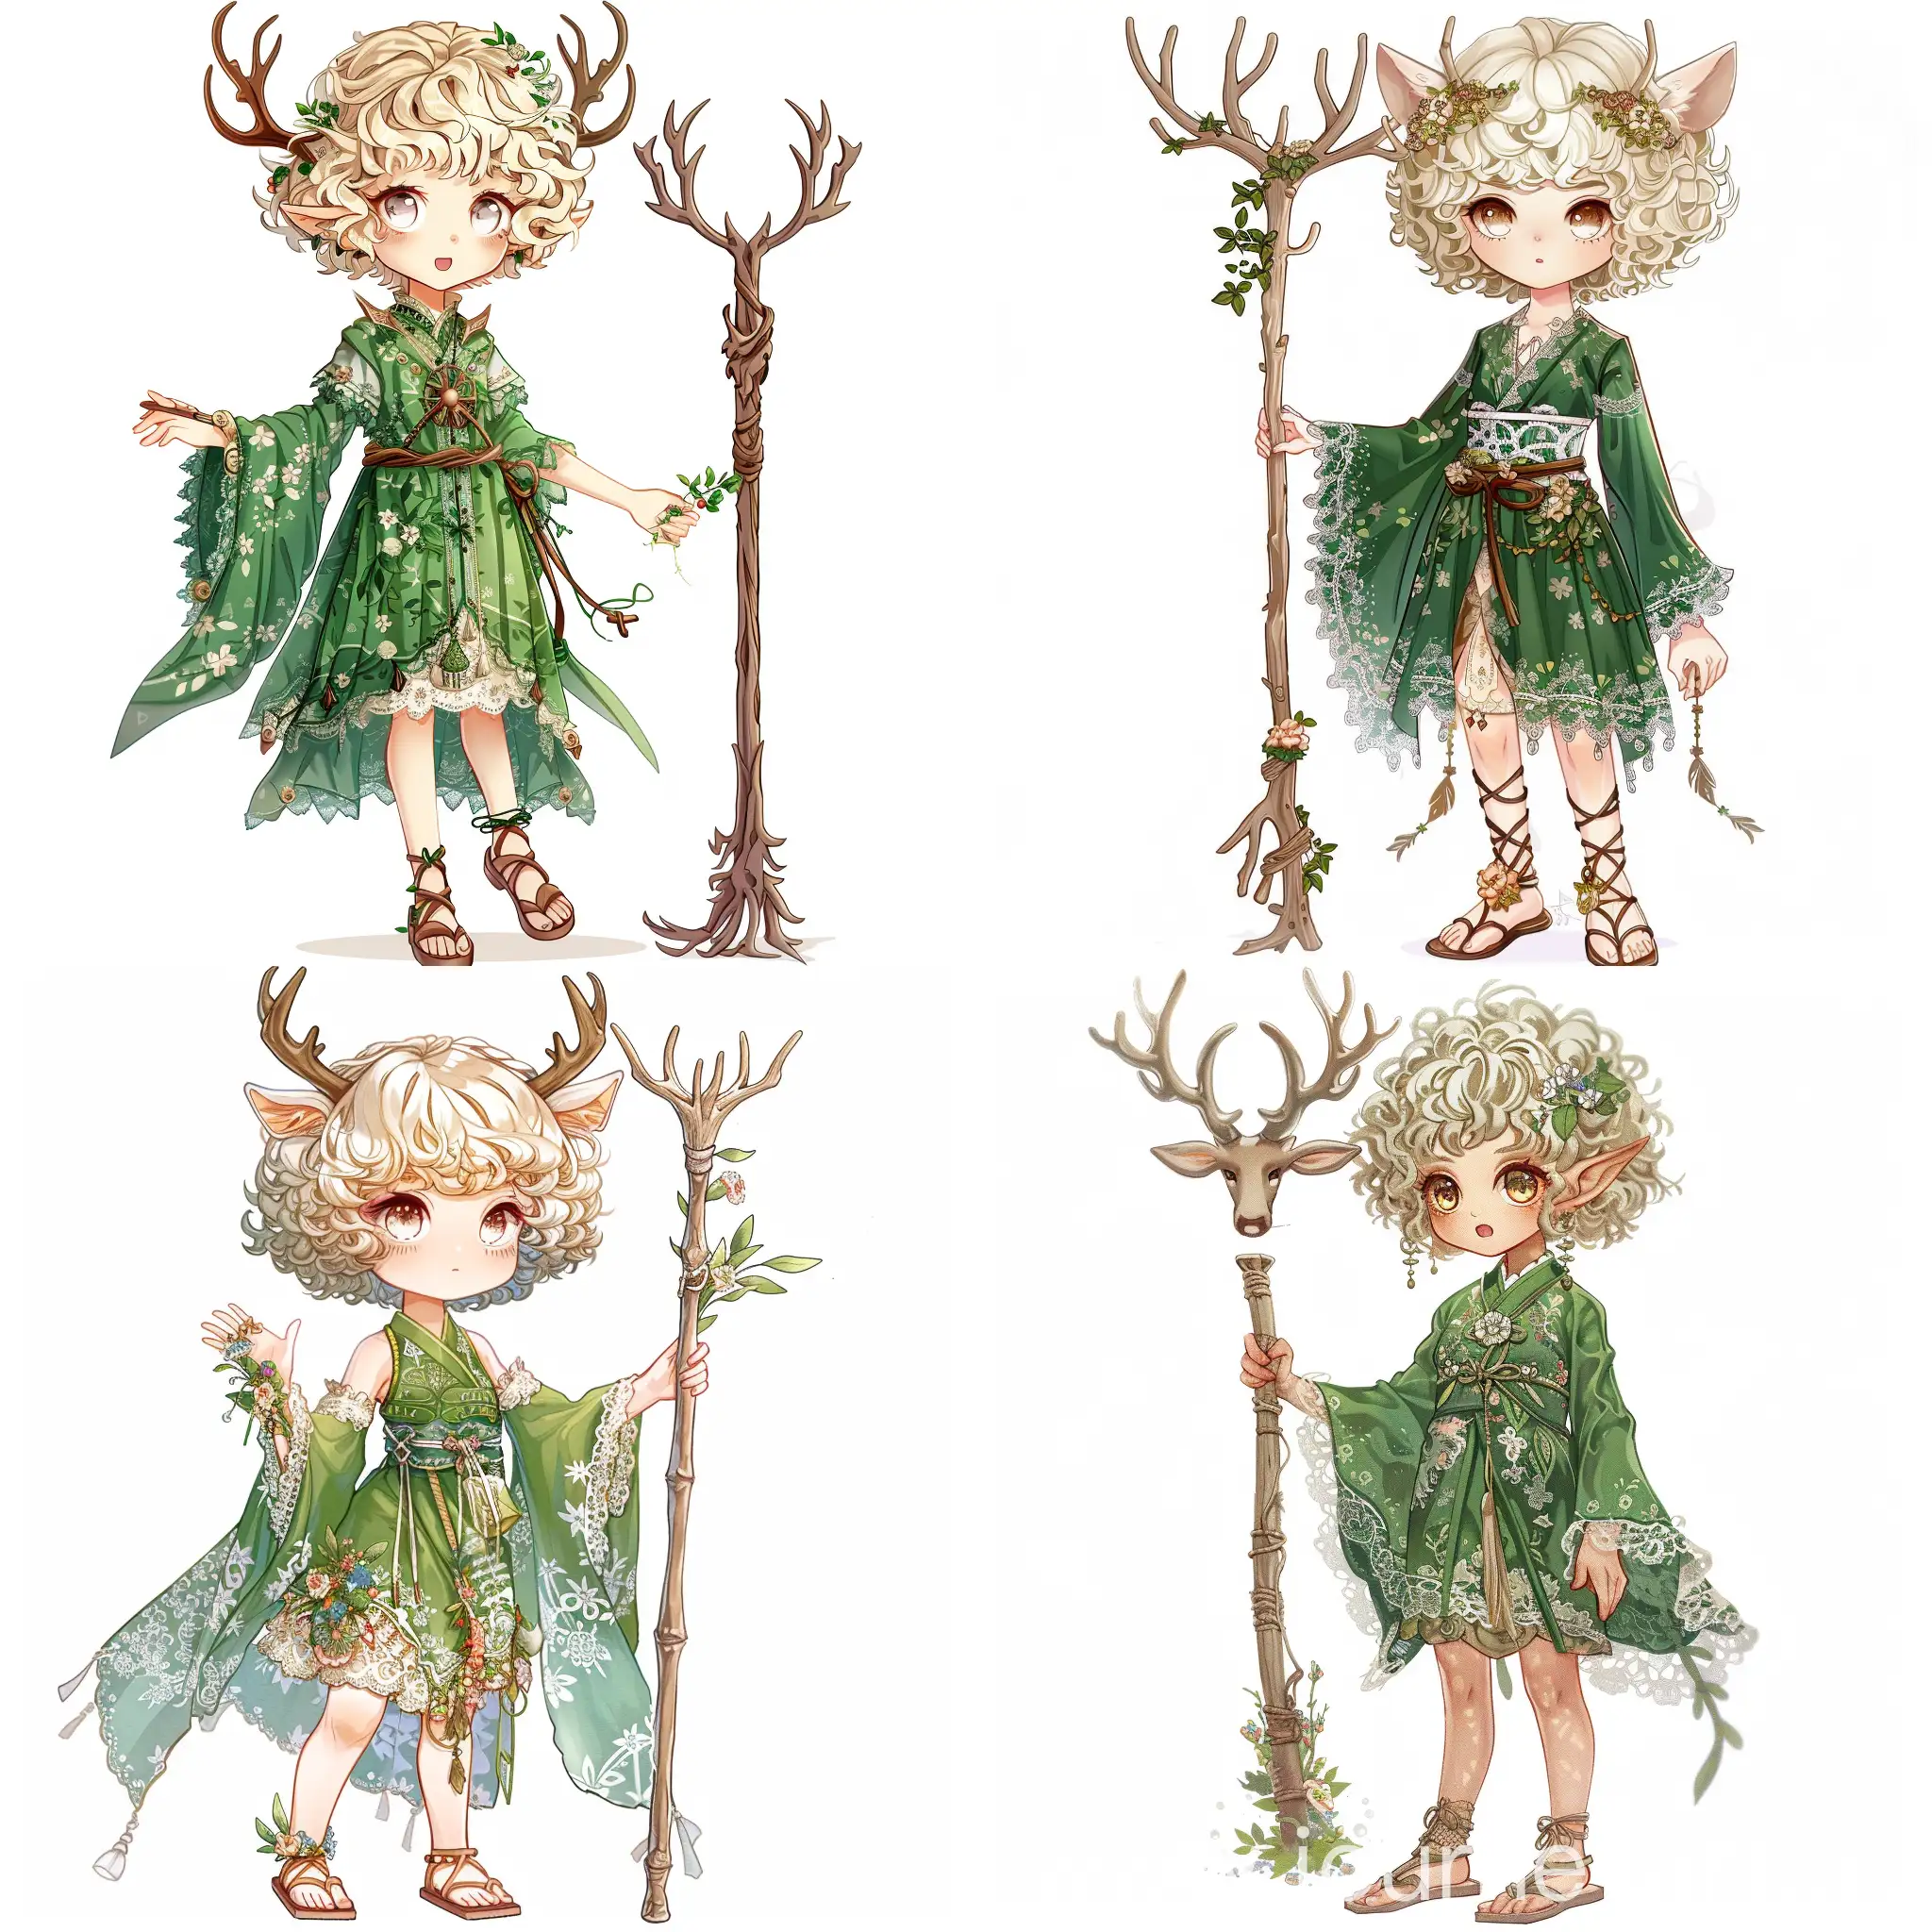 girl in chibi anime style, deer antlers, short curly blond hair, white eyes, green oriental dress with lace, flowers and herbarium on clothes, sandals, full height, wooden staff in hand.